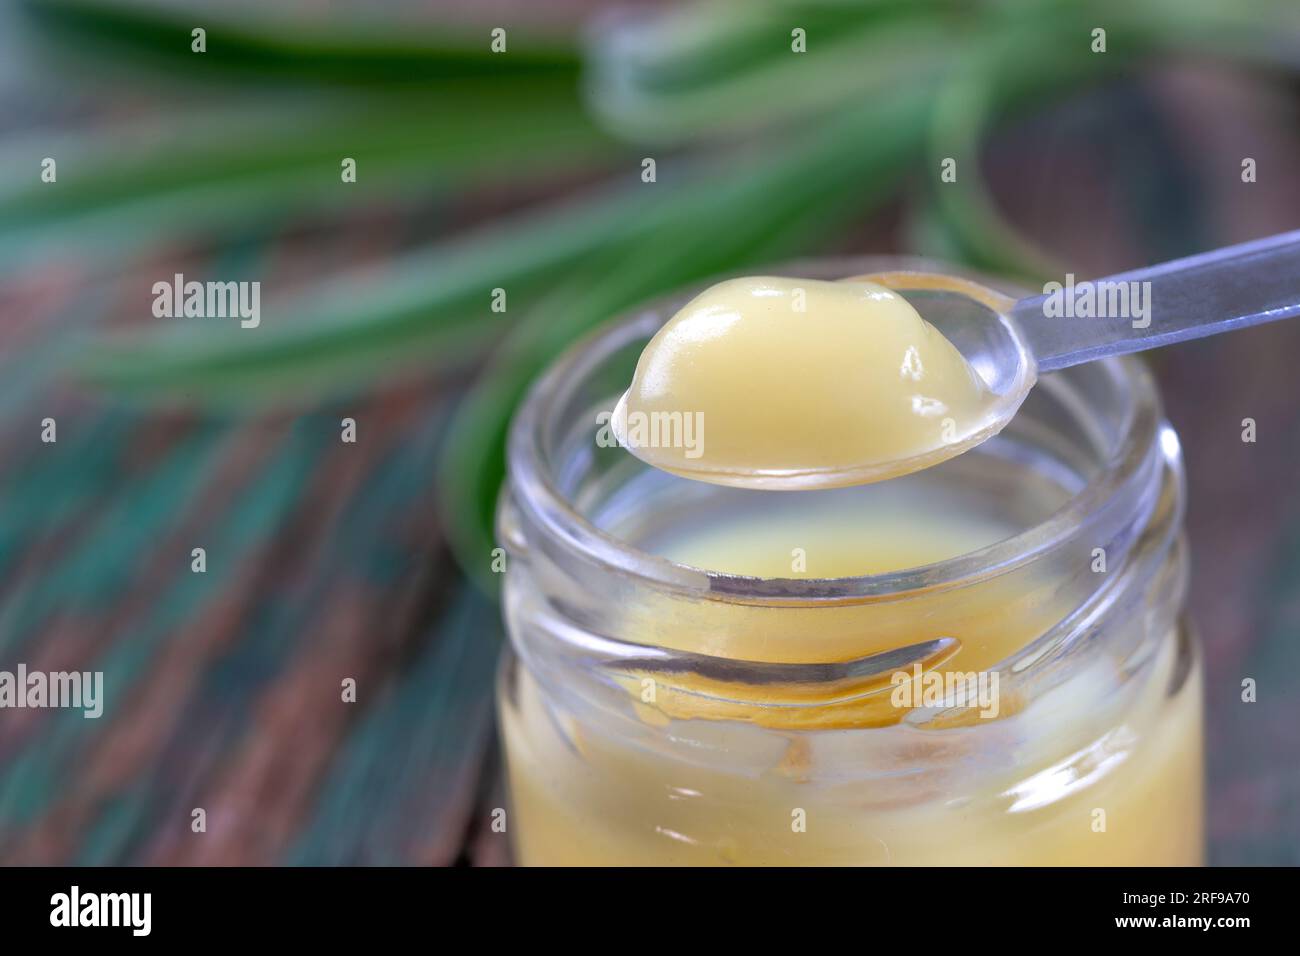 Spoon filled with royal jelly above the jar. Stock Photo